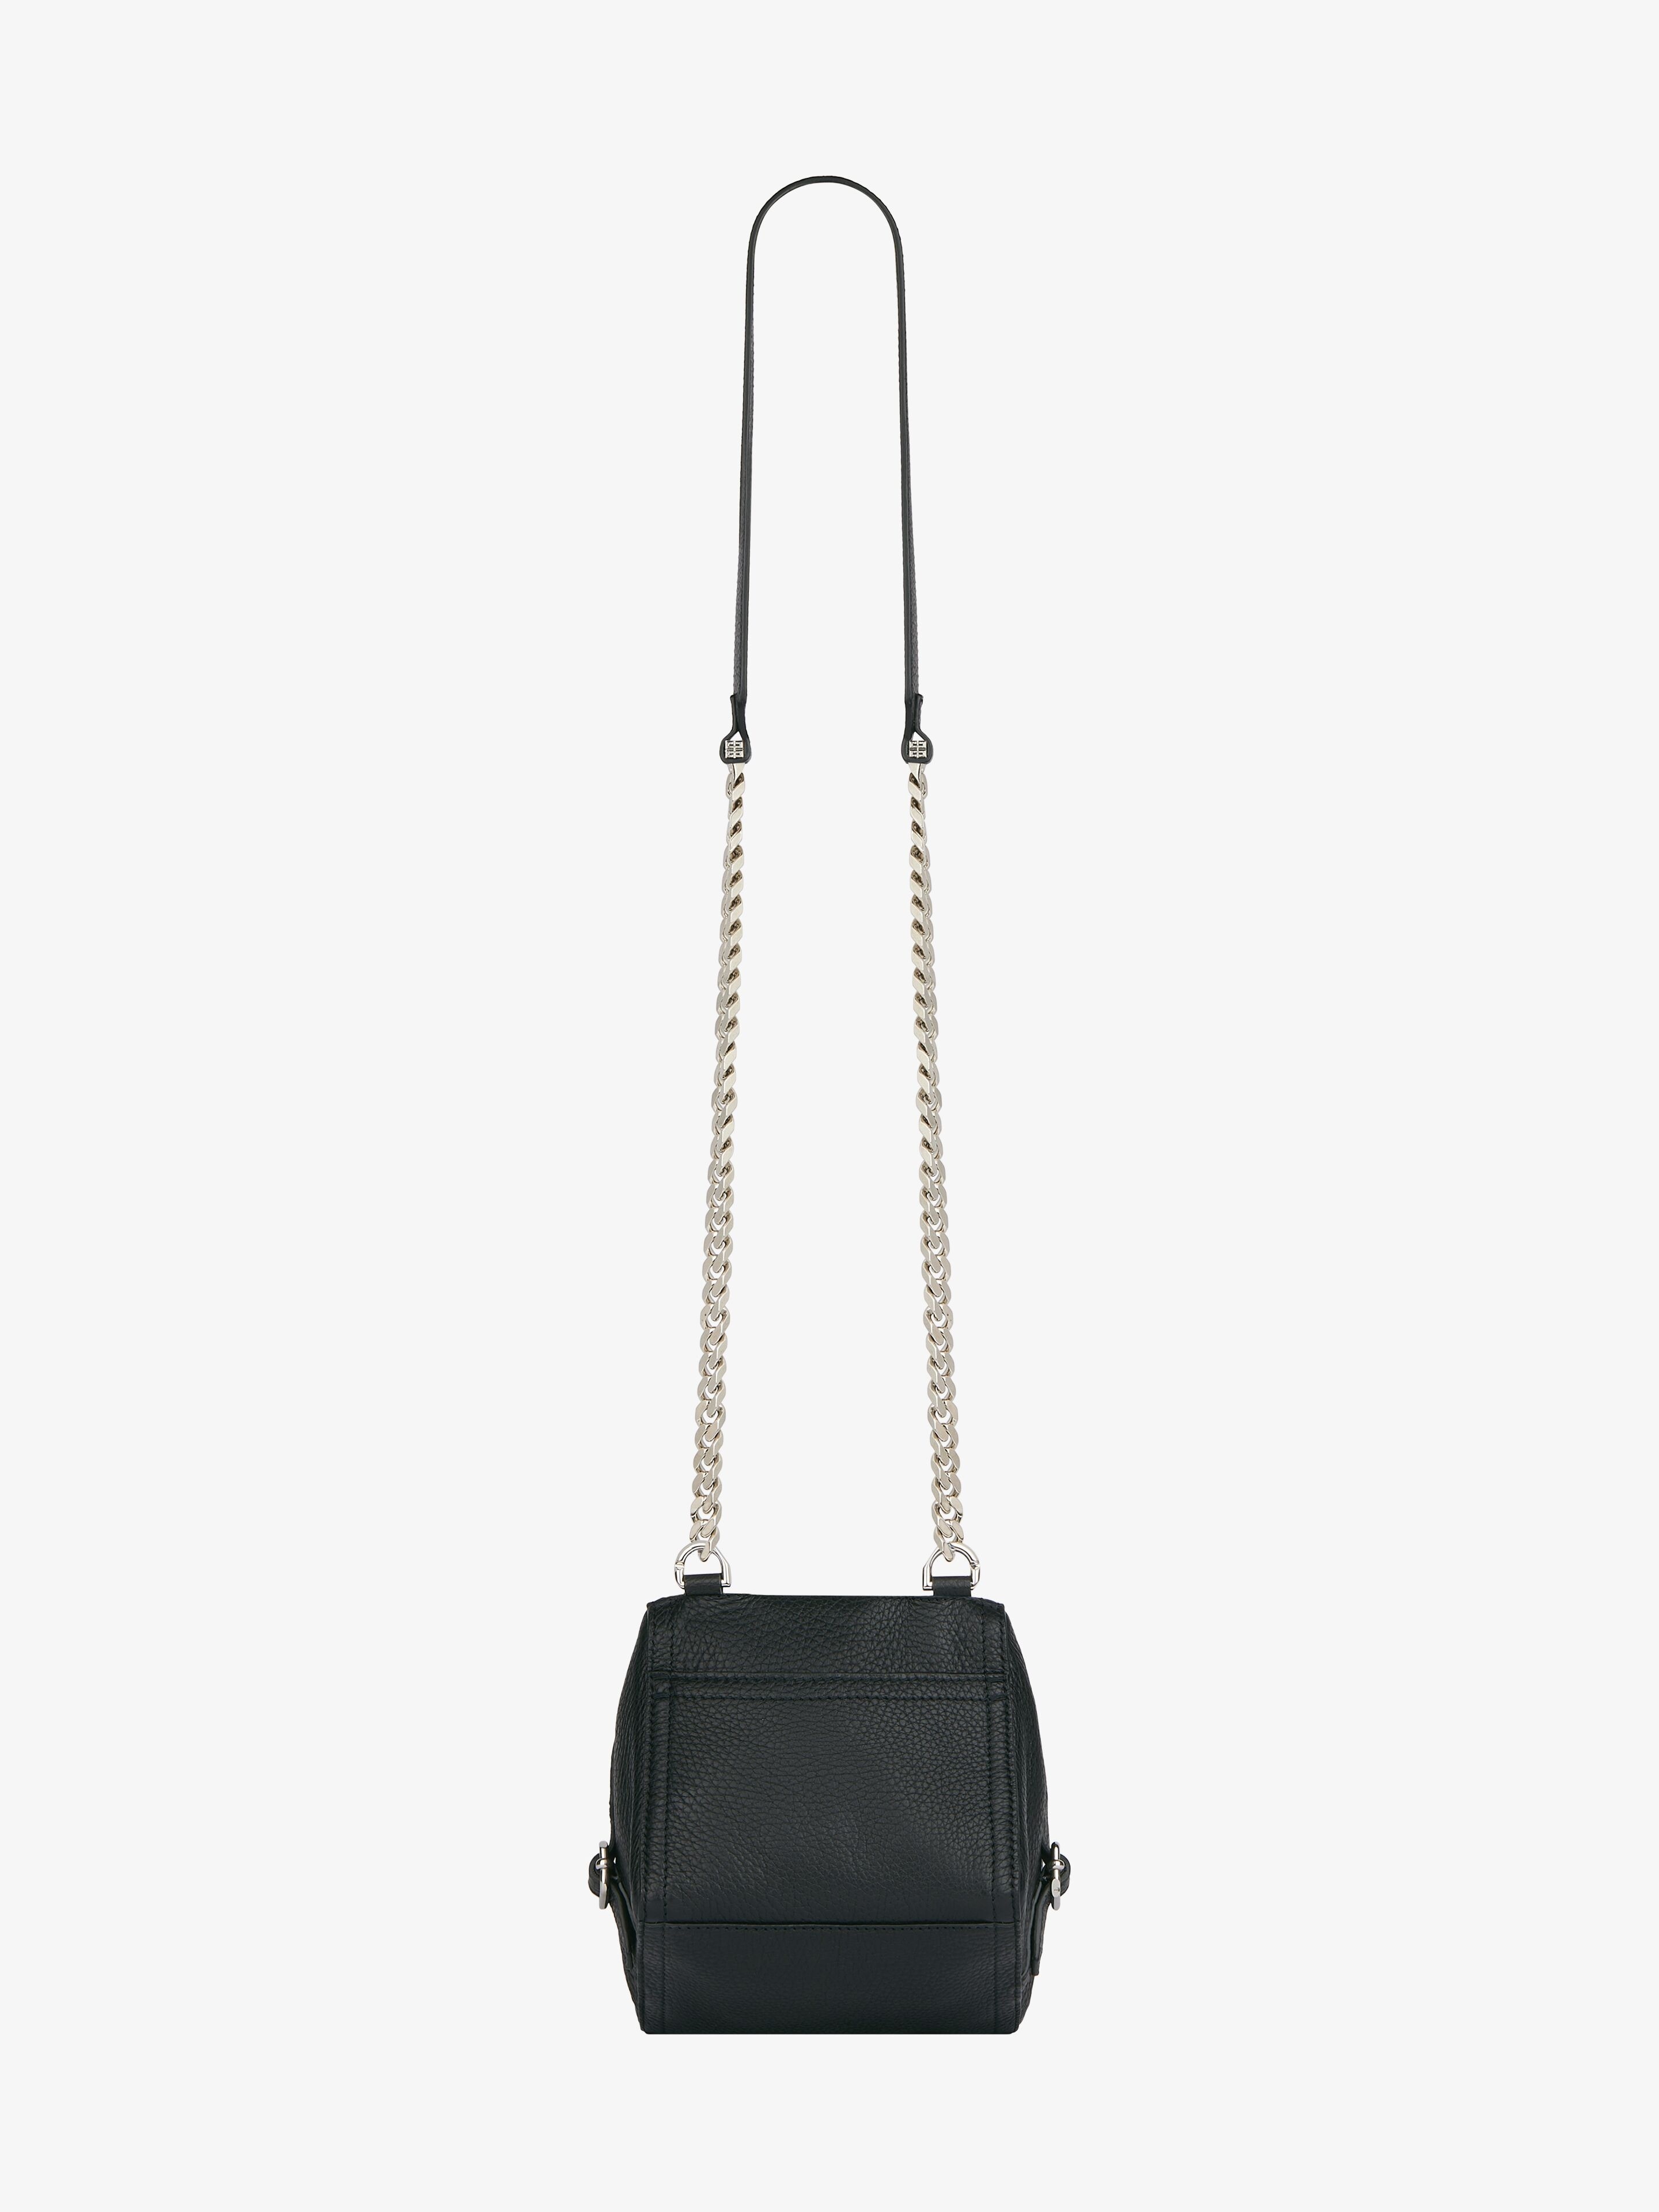 MINI PANDORA BAG IN GRAINED LEATHER WITH CHAIN - 4